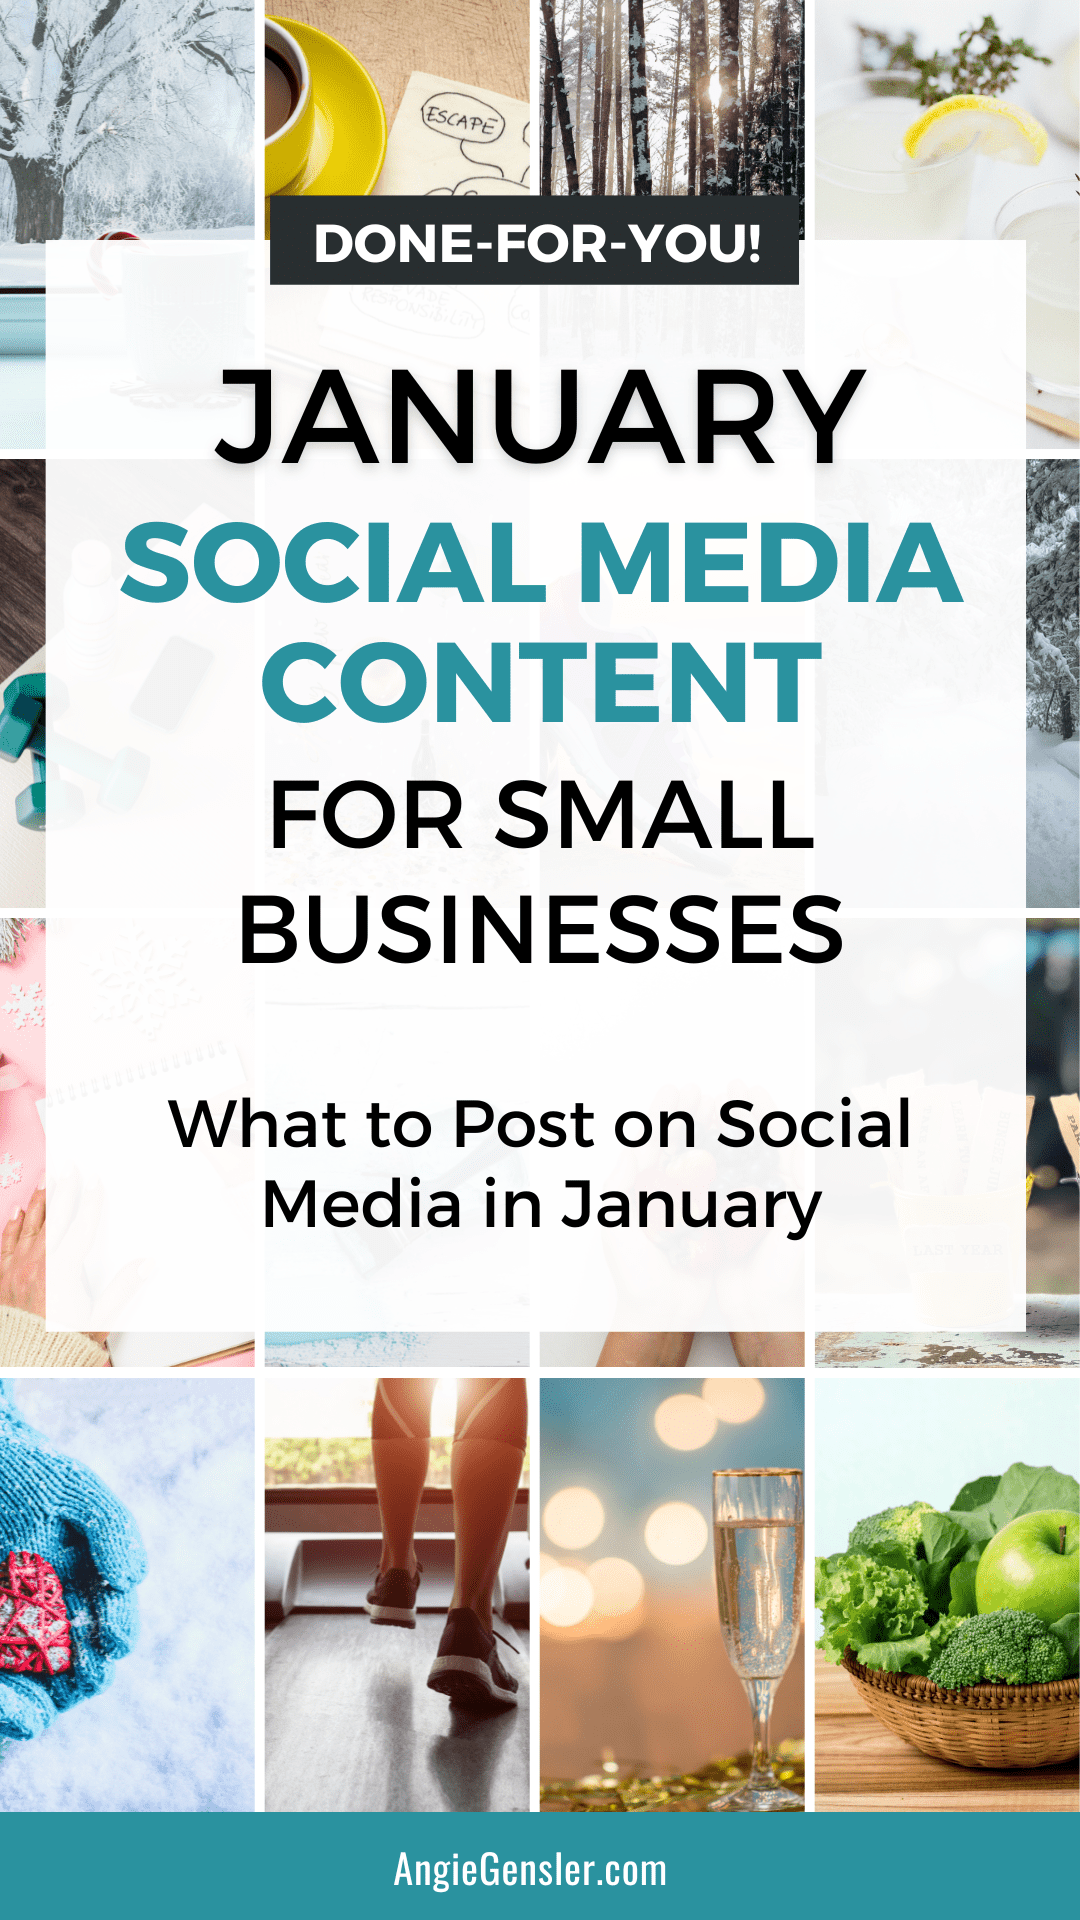 january-social-media-post-ideas-done-for-you-content-angie-gensler